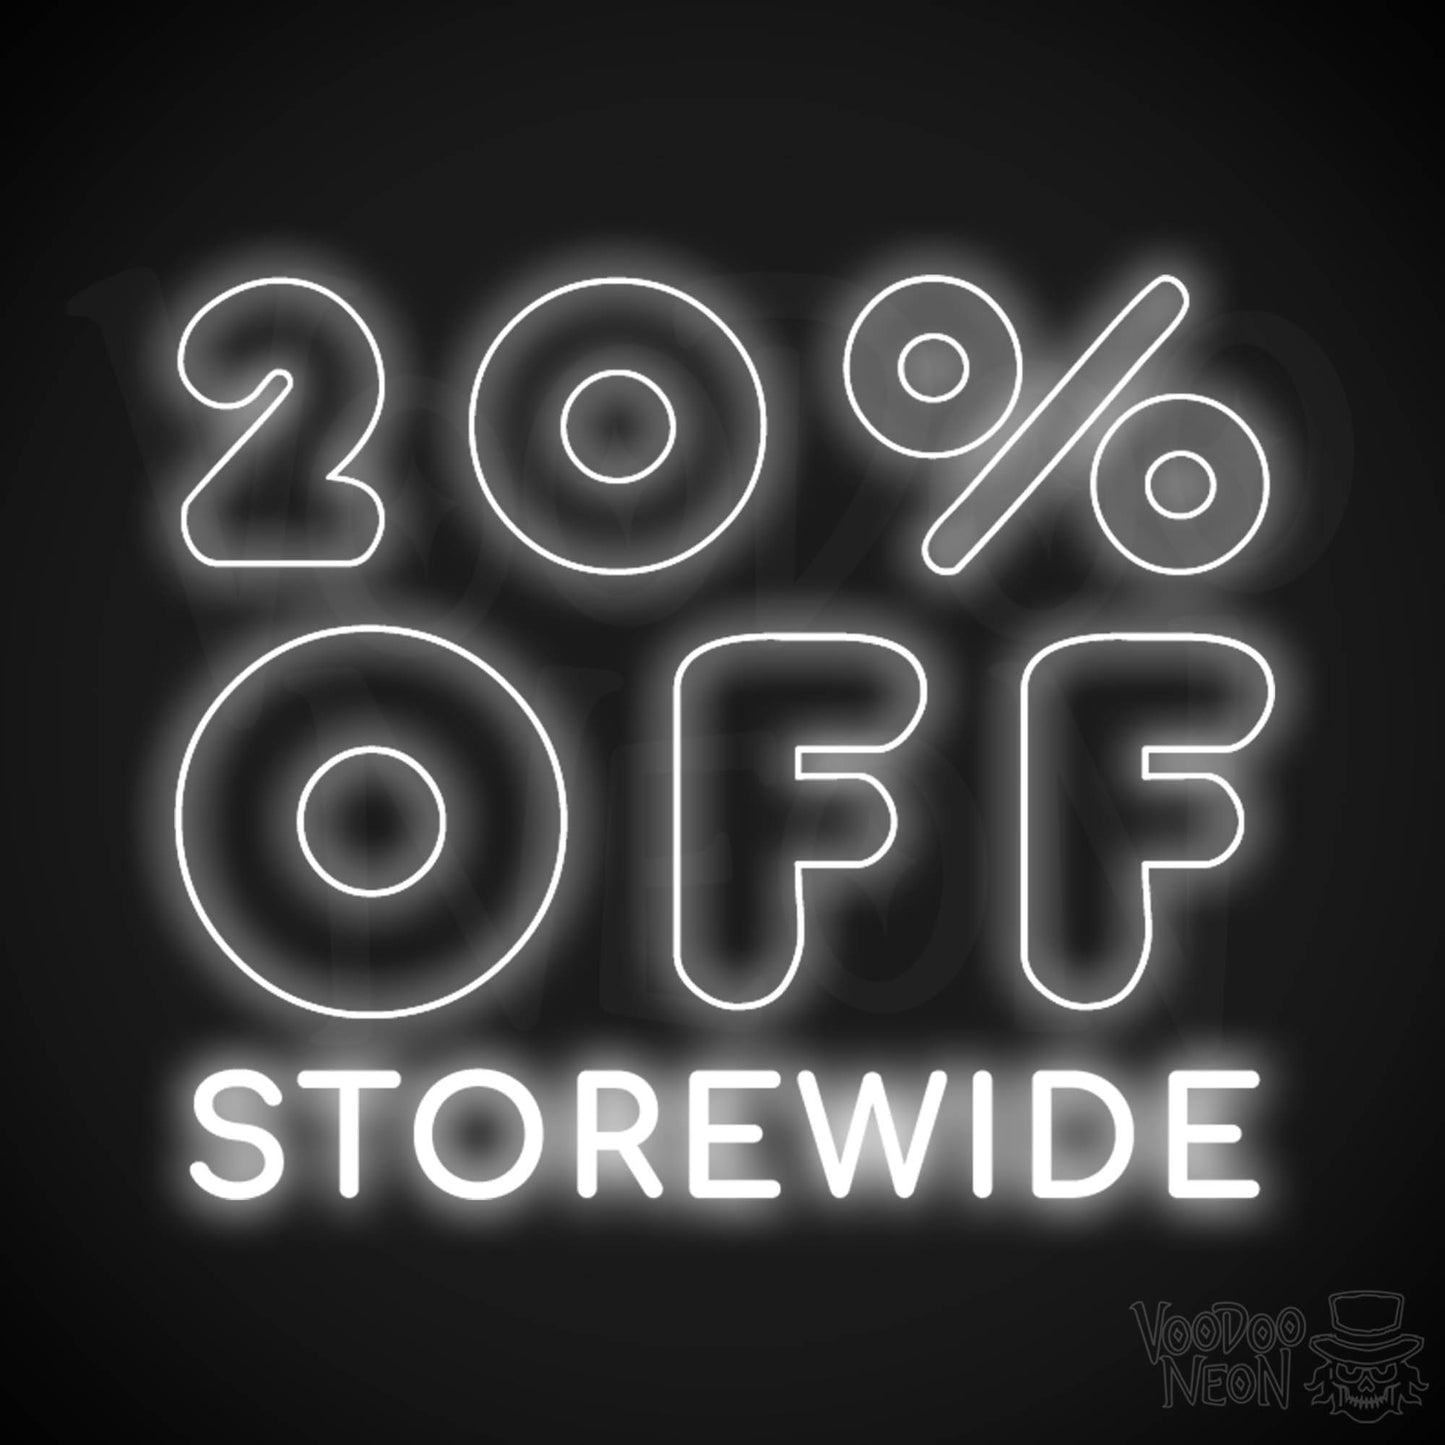 20% Off Storewide Neon Sign - 20% Off Storewide Sign - LED Shop Sign - Color White